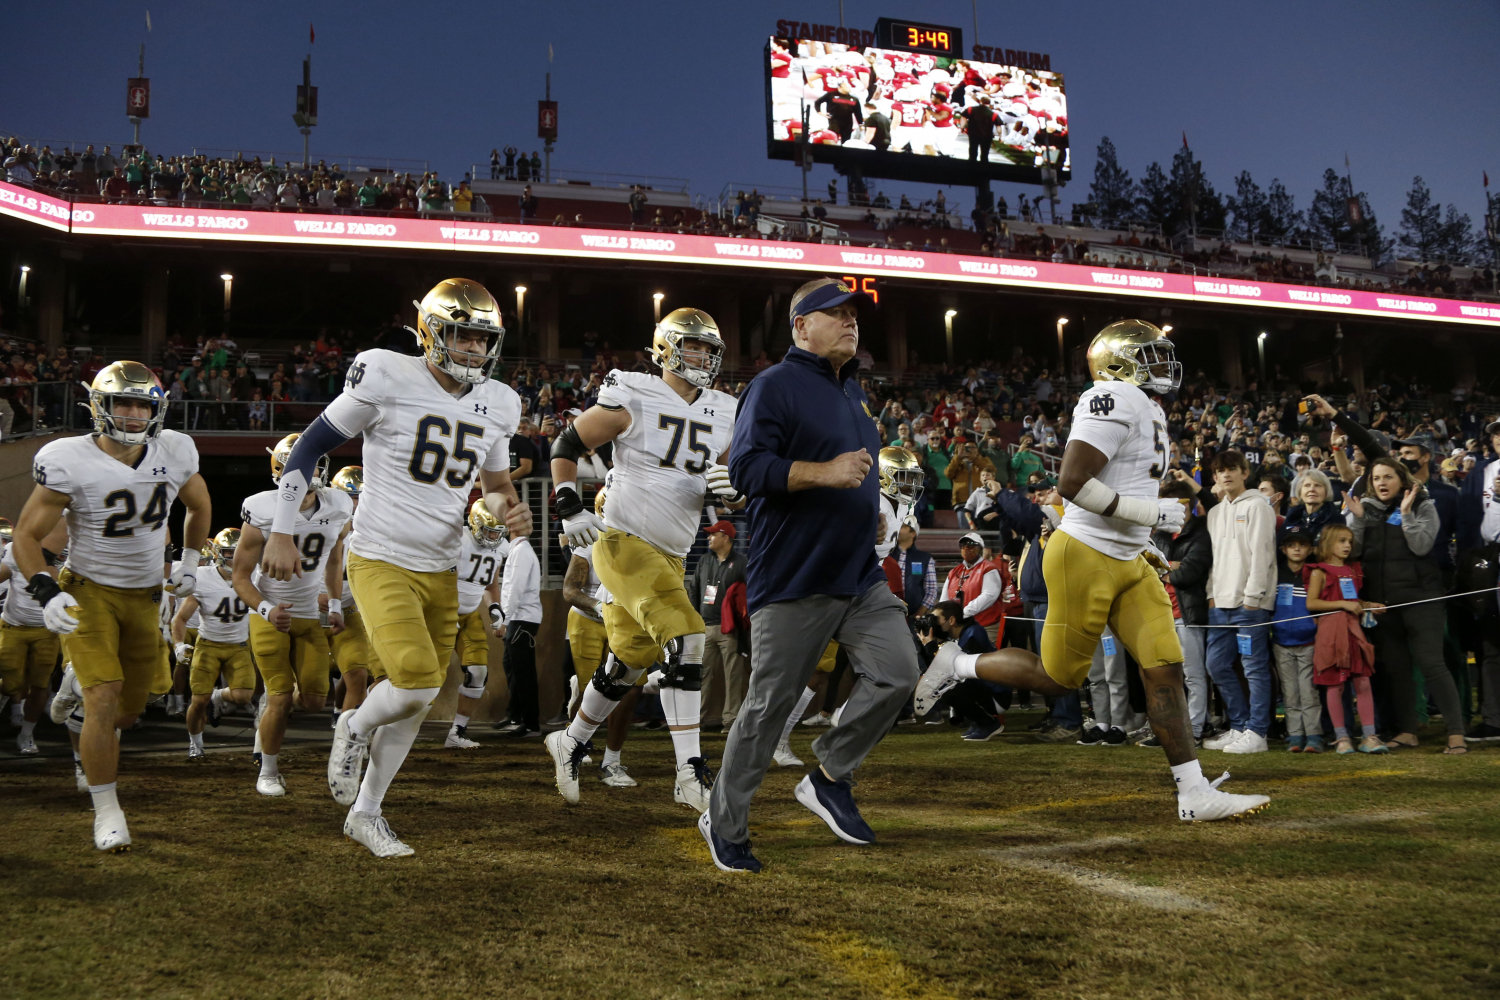 Notre Dame head football coach Brian Kelly leaving for LSU after 12 seasons